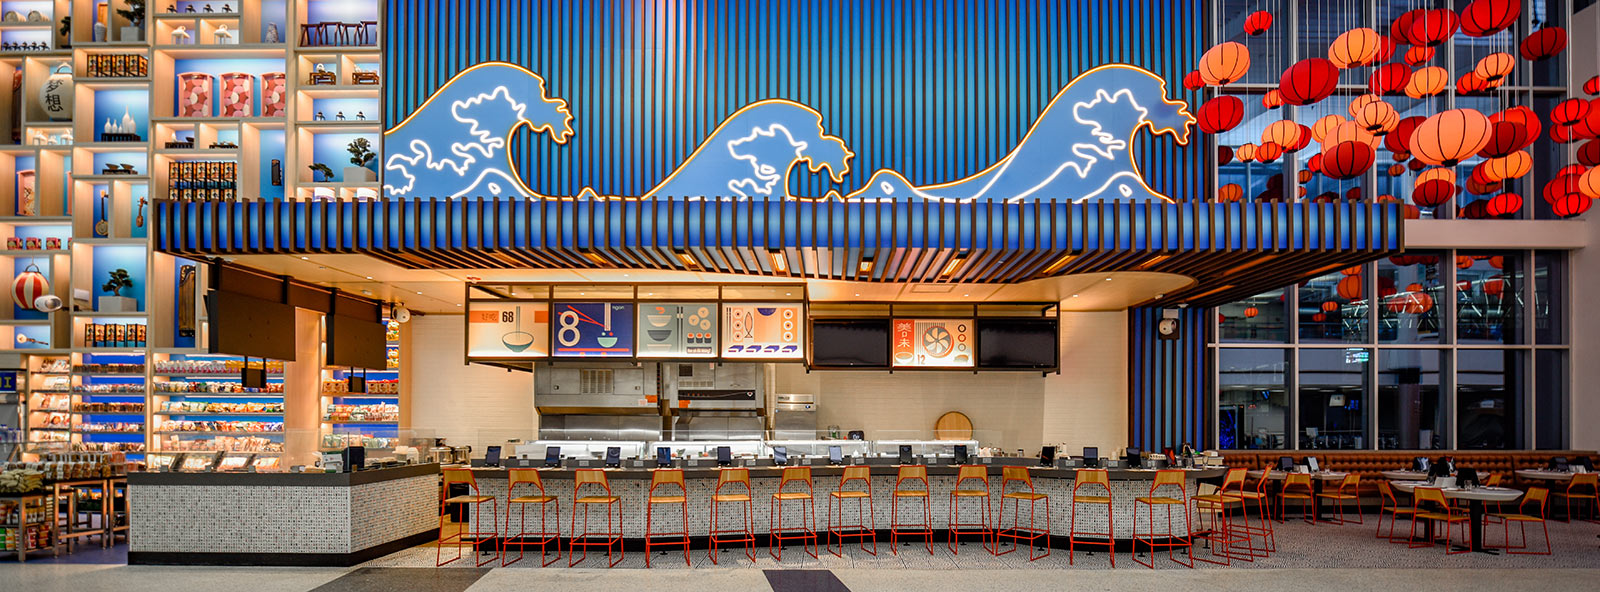 Yume Airport Restaurant Structure and Signage